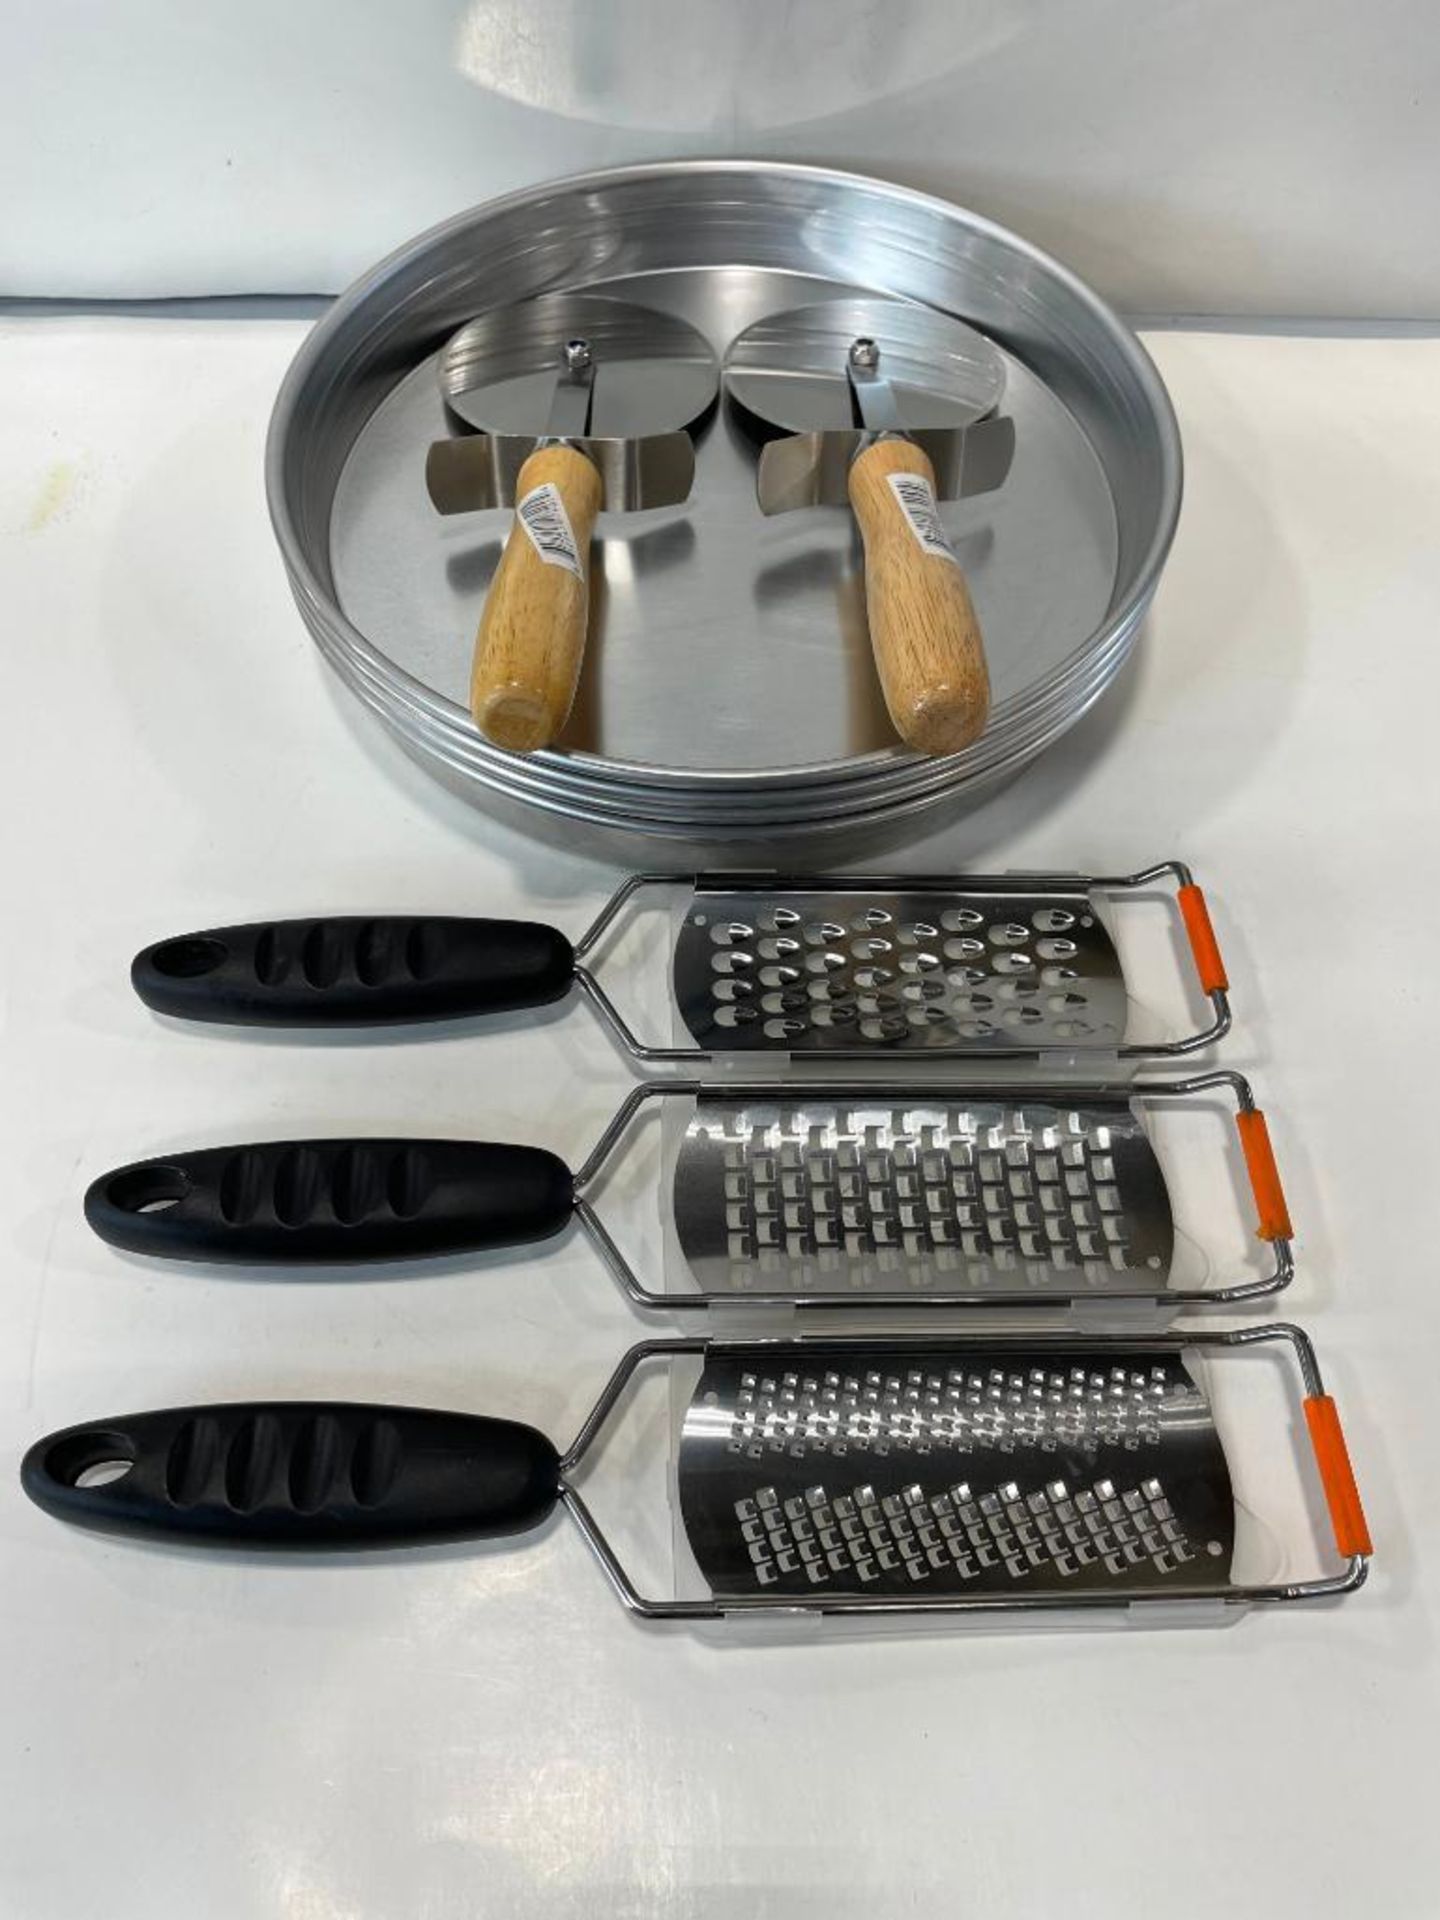 10" PIZZA PAN SET INCLUDING: (4) 15" PIZZA PANS, (2) PIZZA CUTTERS & (3) GRATERS - Image 2 of 6